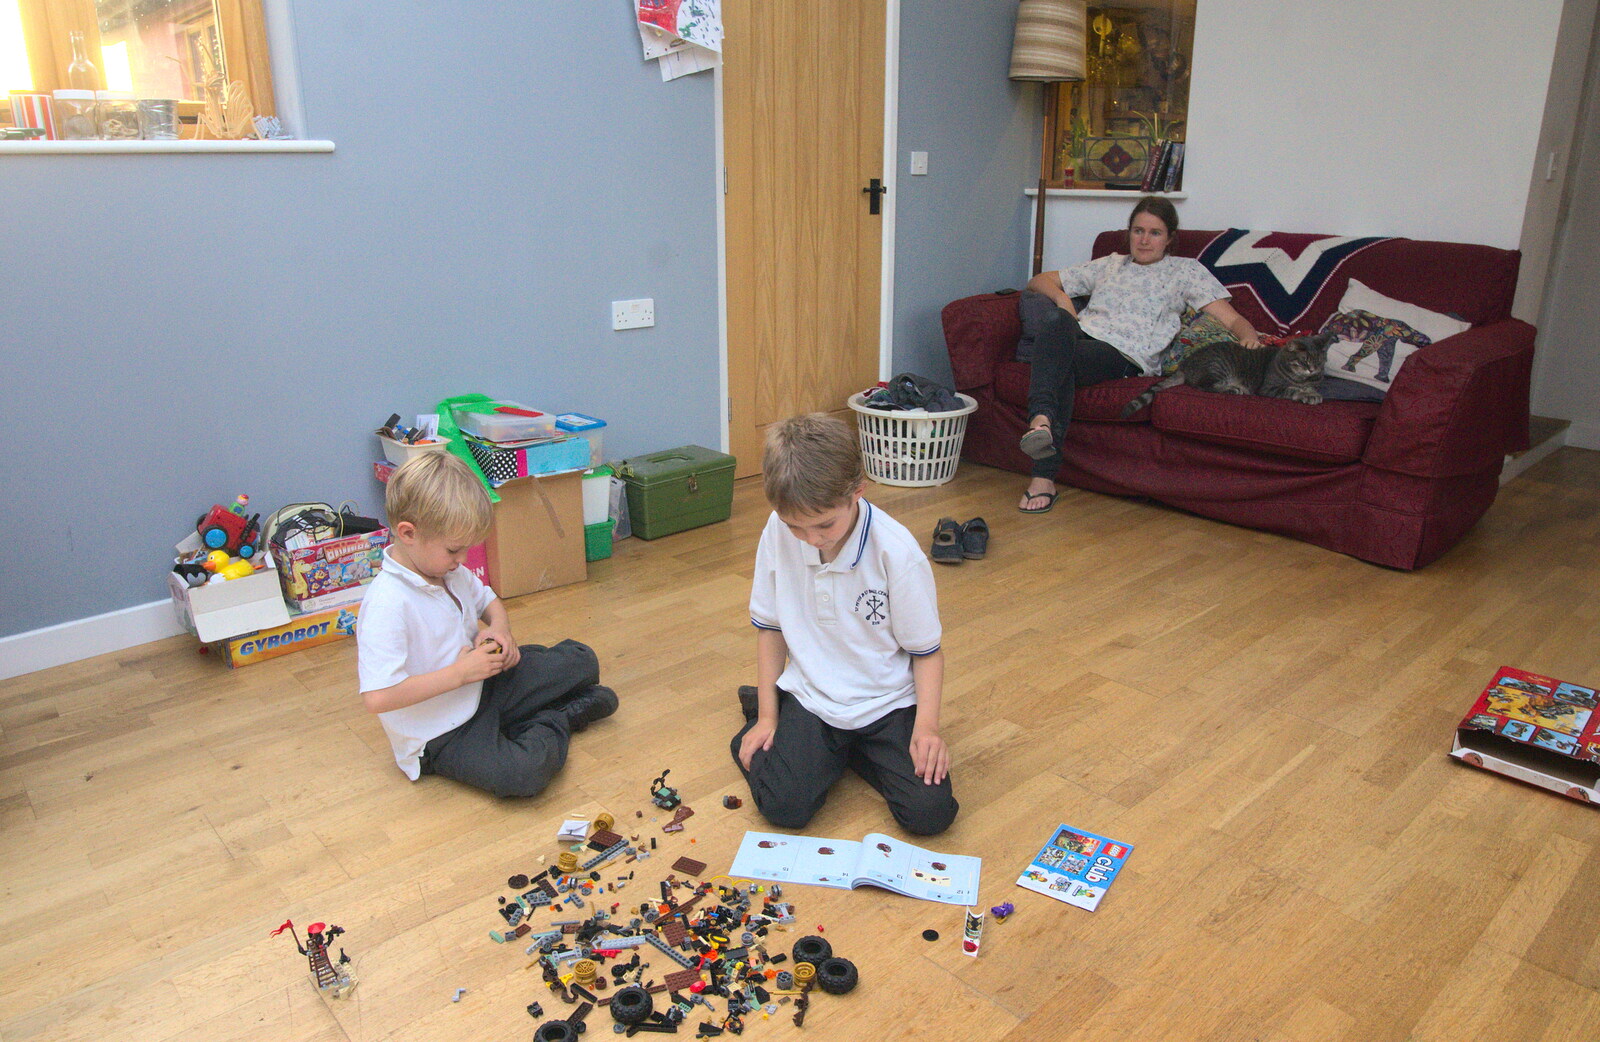 The boys do Lego in the back room from Fred's Birthday Bicycle at Madgett's, Diss, Norfolk - 23rd September 2016